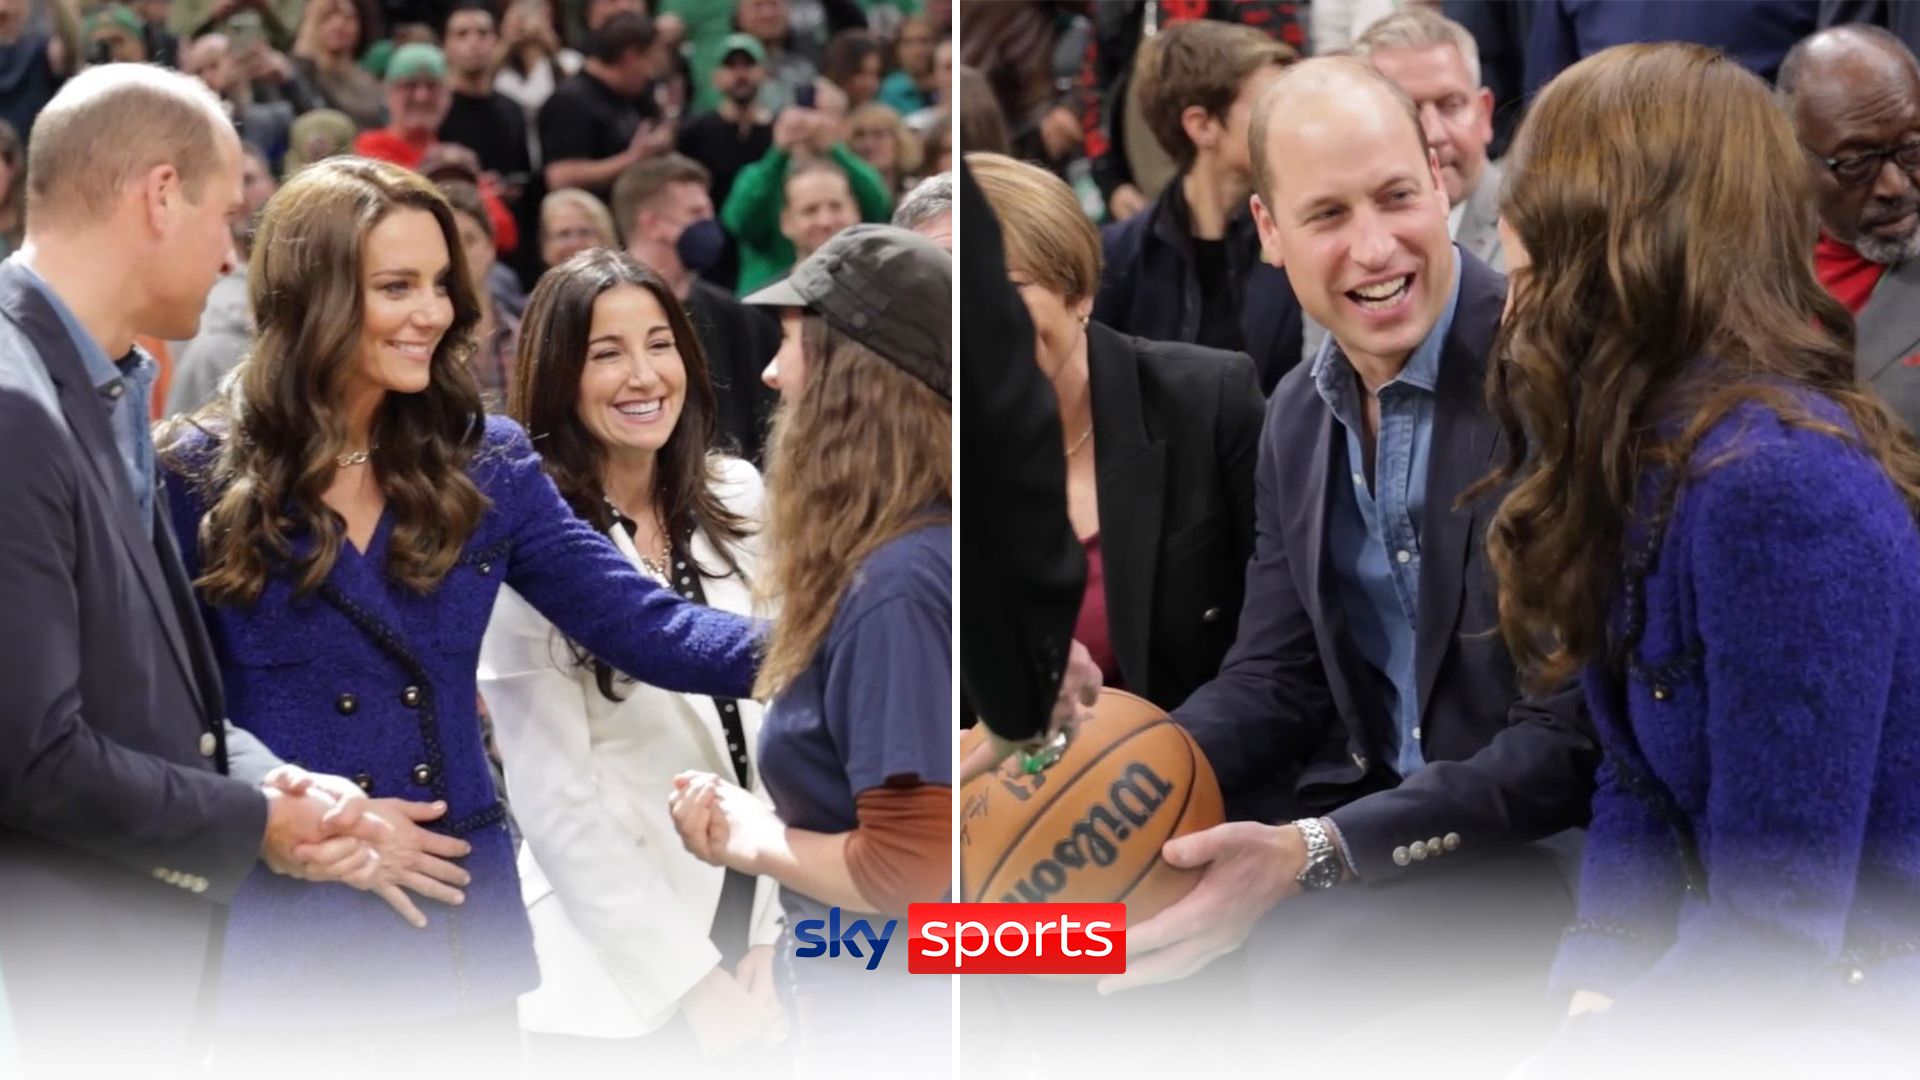 Prince and Princess of Wales attend Celtics vs Heat game